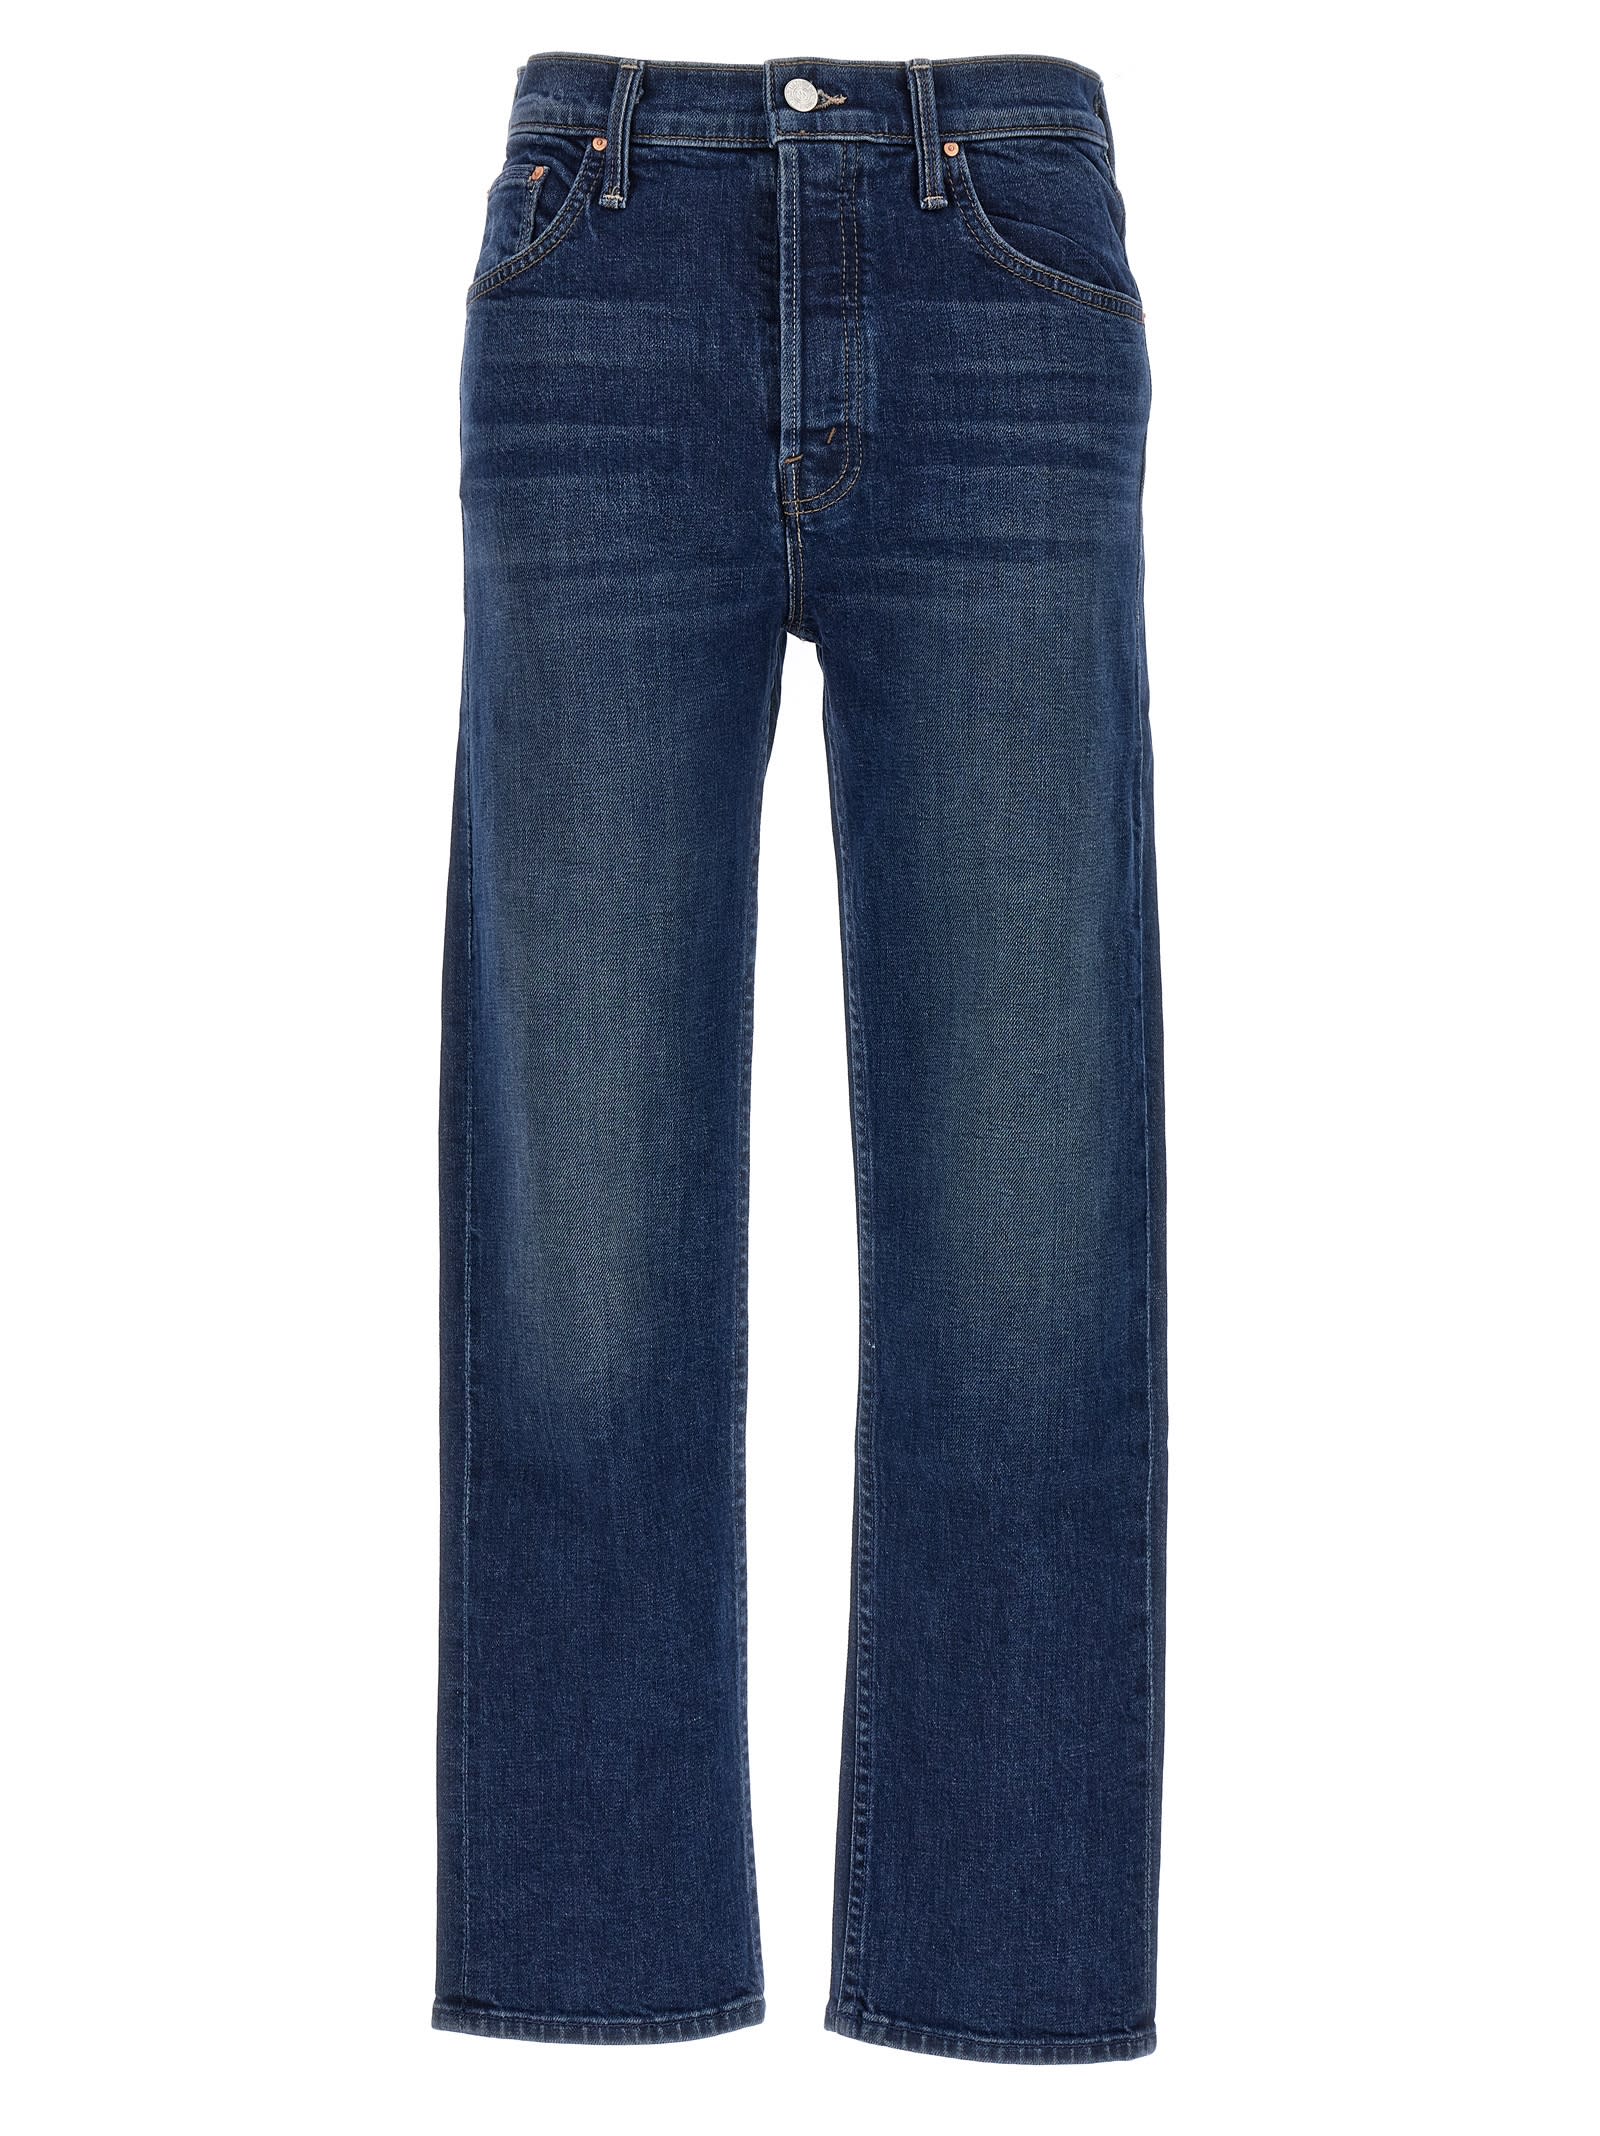 MOTHER TOMCAT ANKLE JEANS